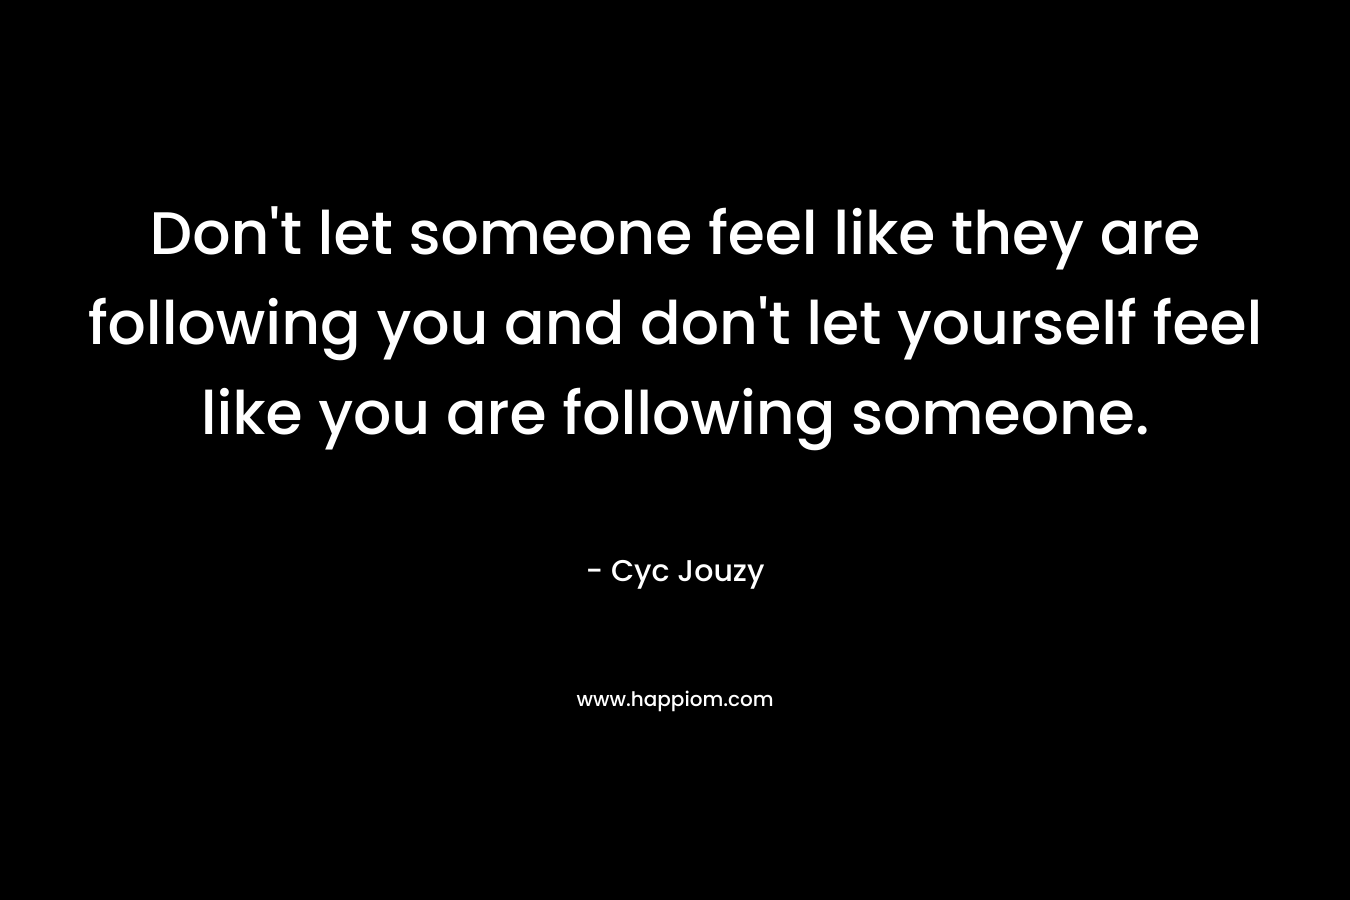 Don't let someone feel like they are following you and don't let yourself feel like you are following someone.